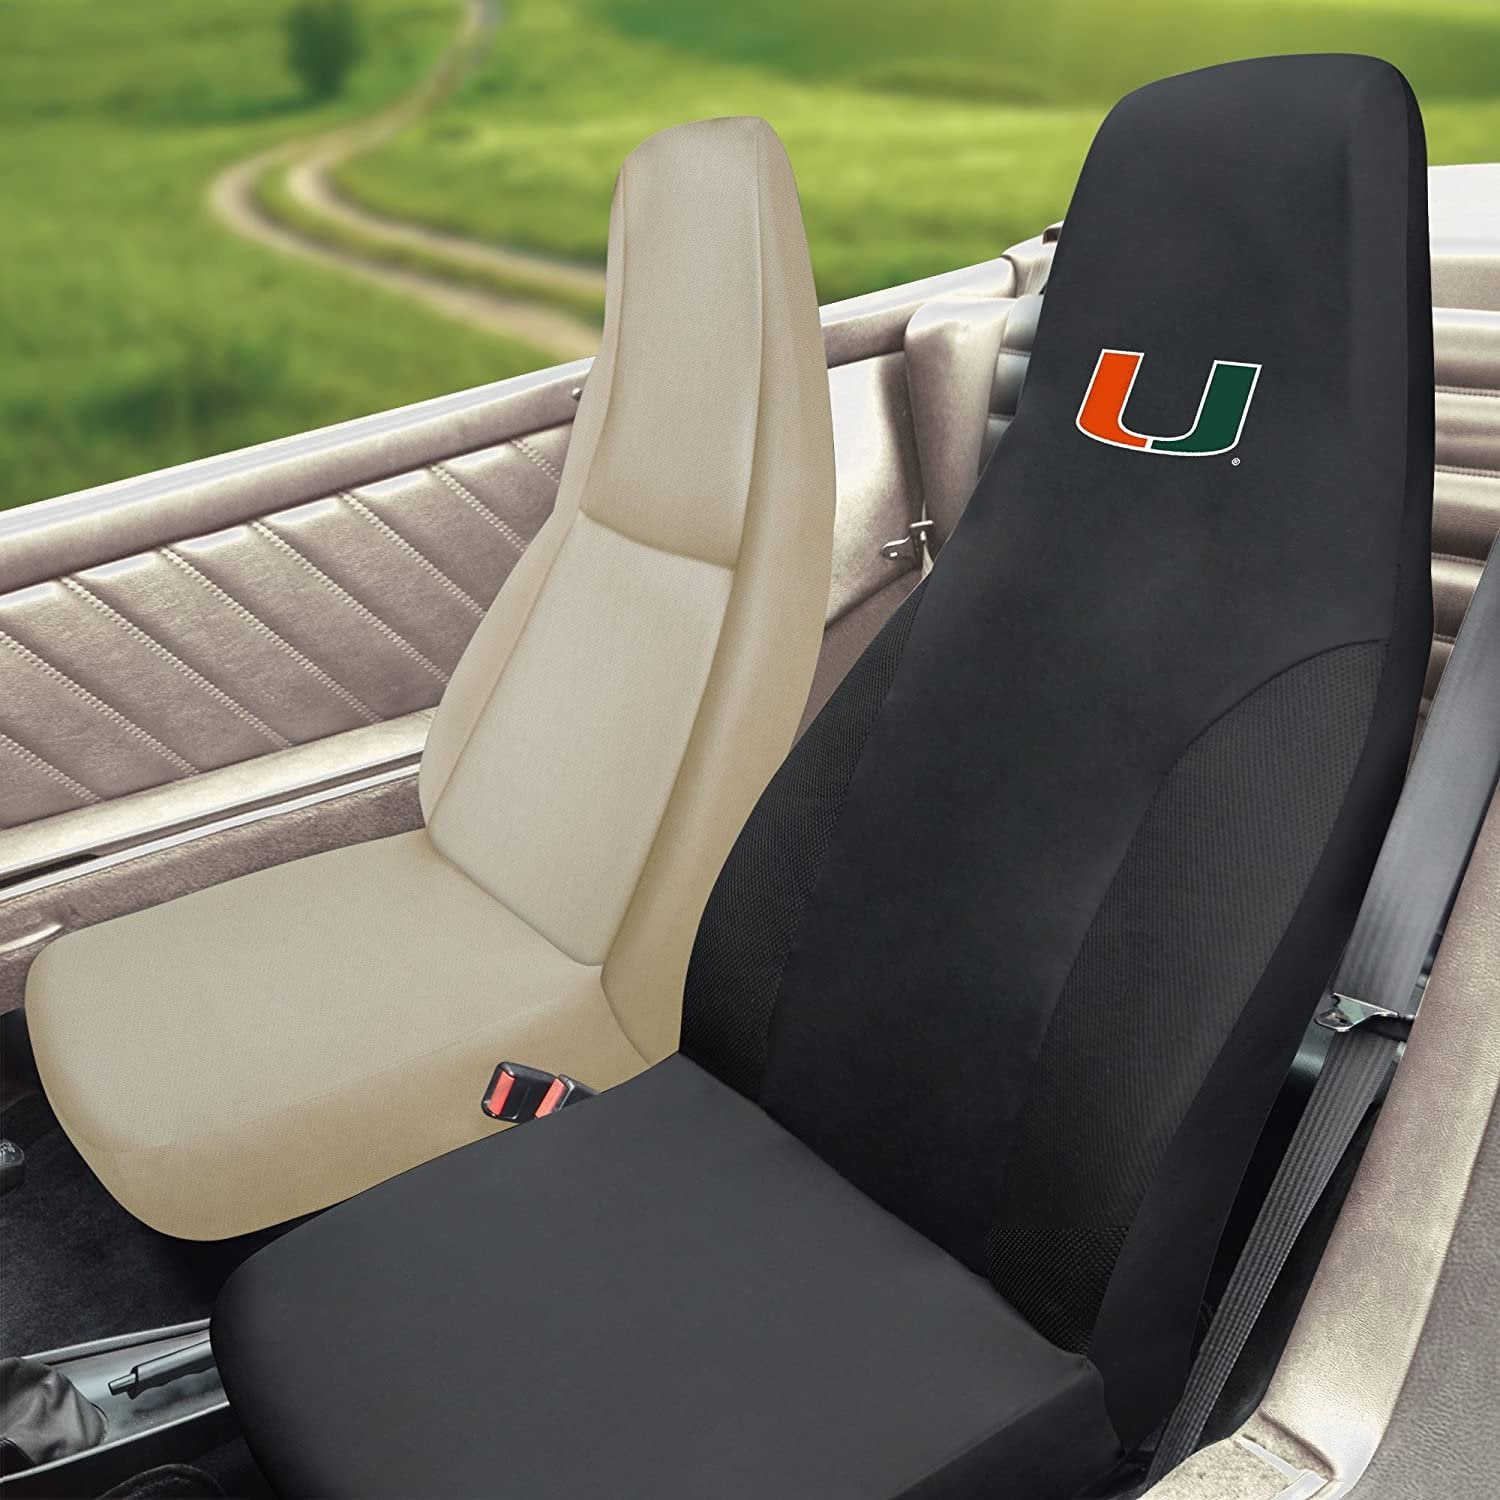 FANMATS 15080 NCAA University of Miami Hurricanes Polyester Seat Cover